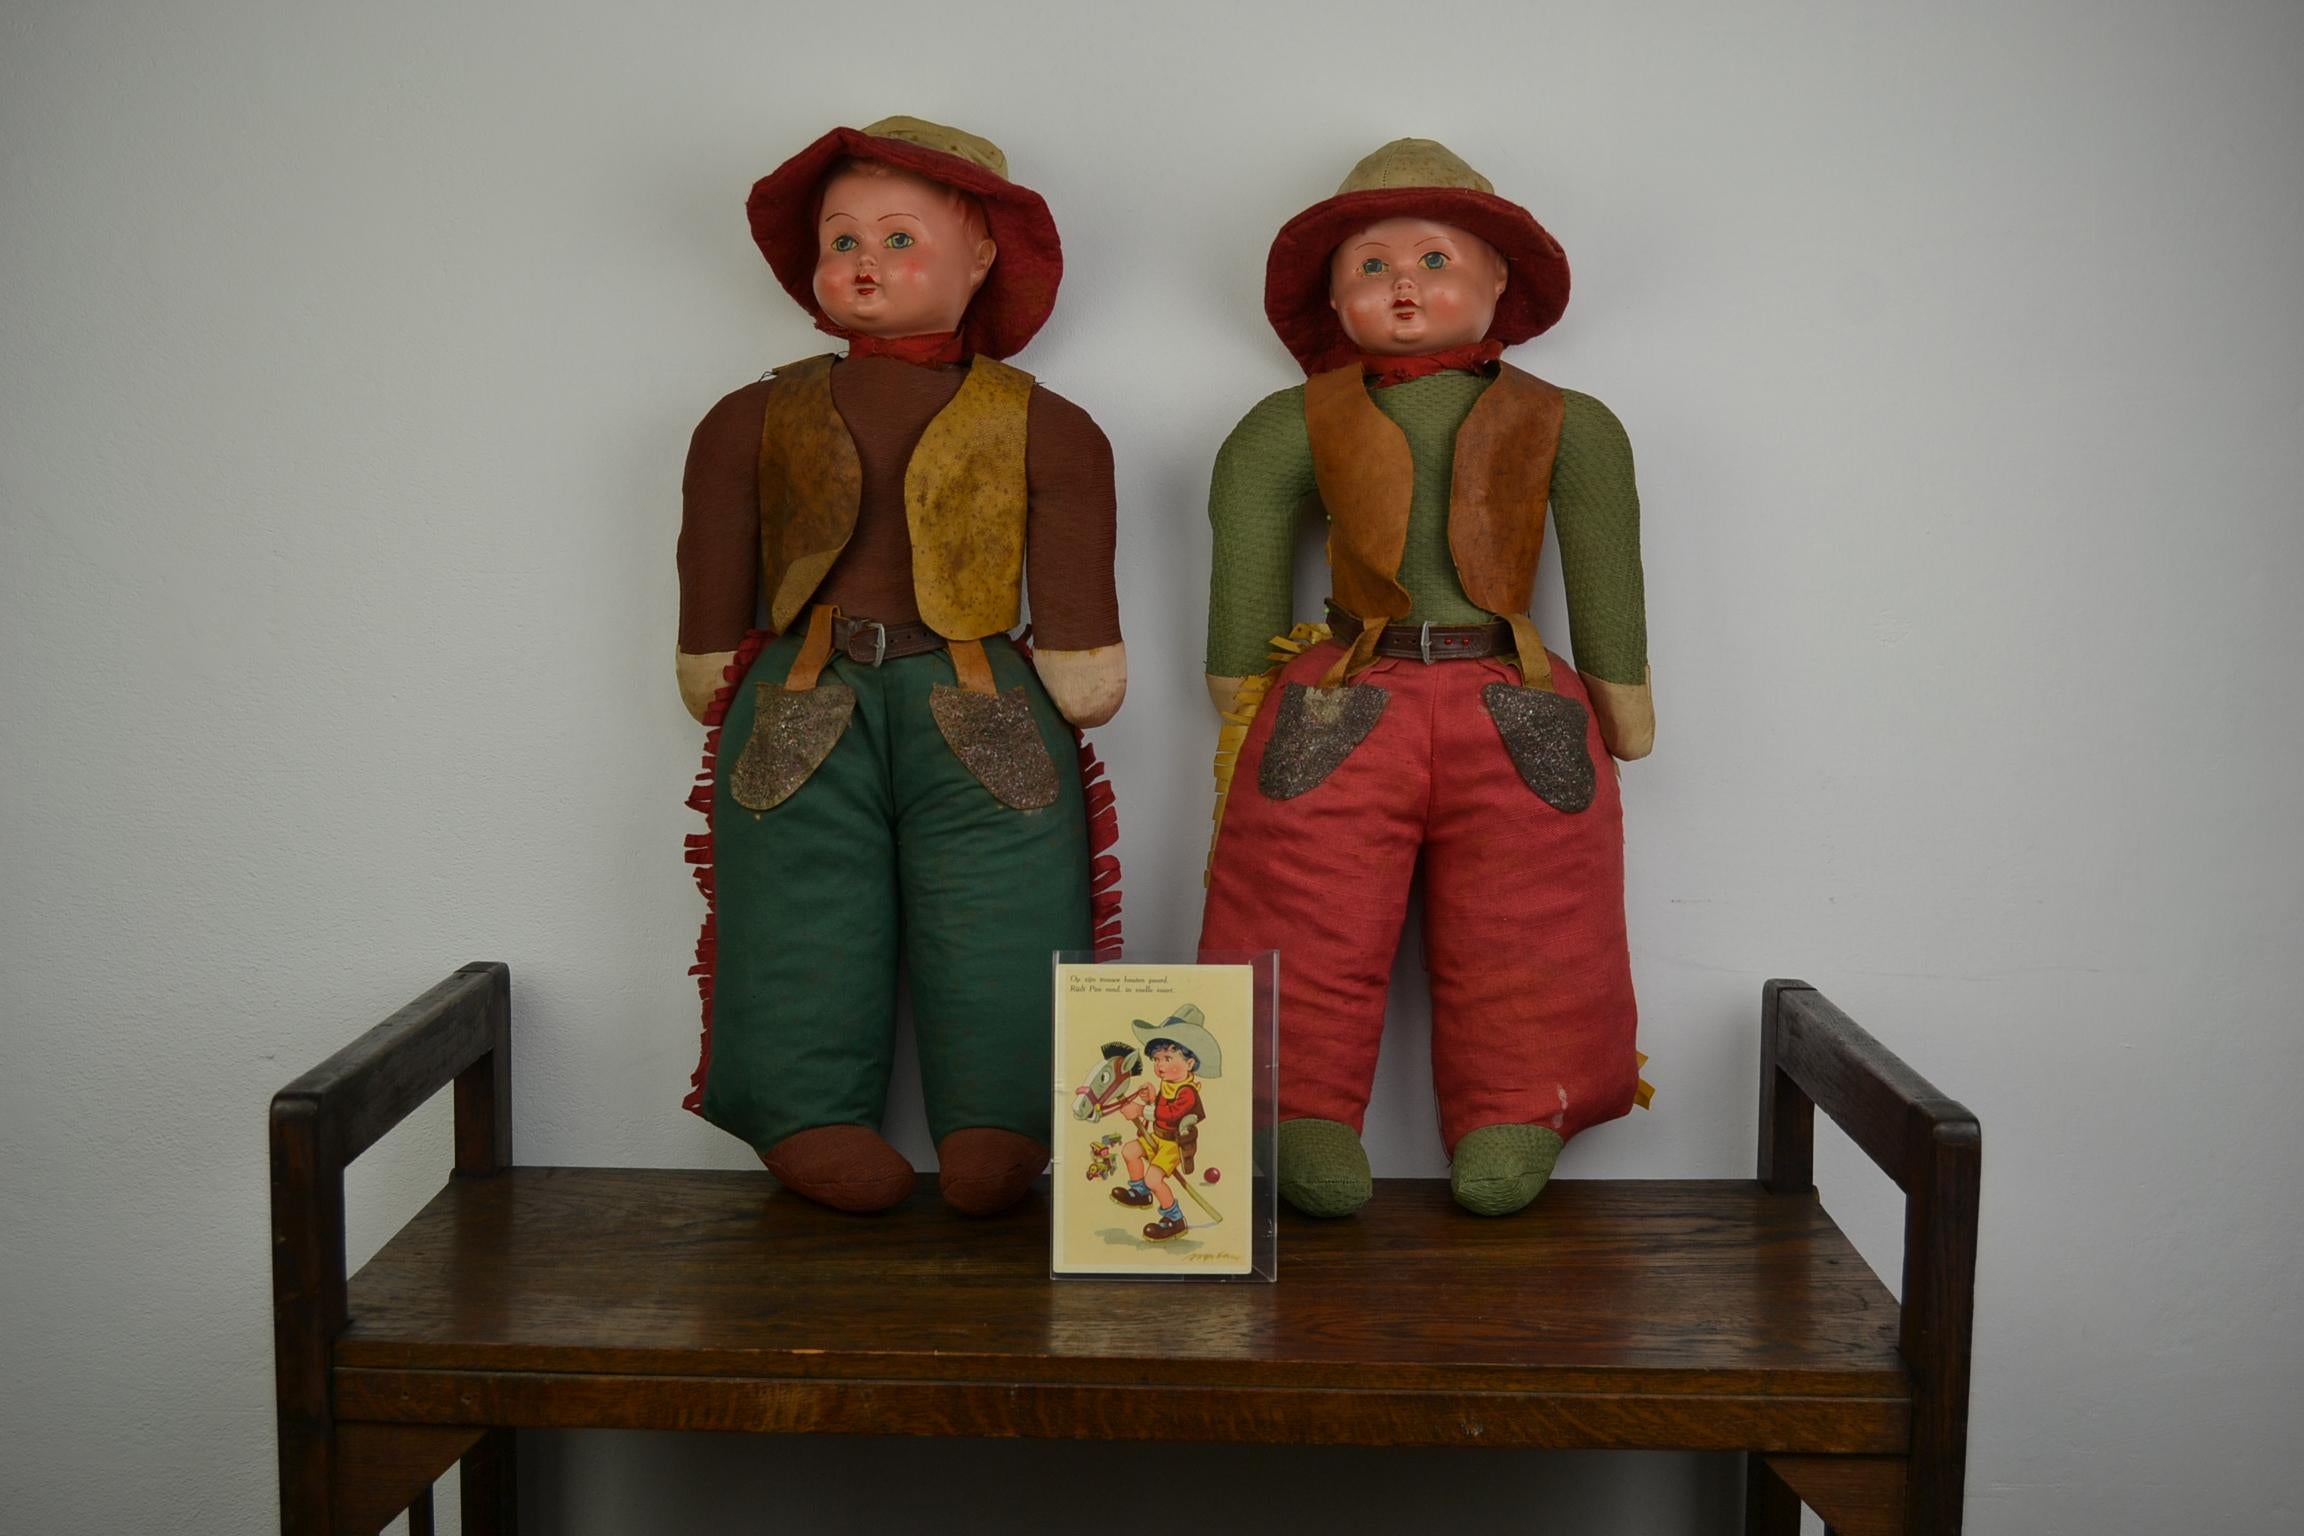 Awesome pair of Western Cowboy and Cowgirl Toy Dolls.
These two Large Dolls have a stuffed body with straw 
and heads of Composition. They date from the 1930s.
Both dolls are dressed in very detailed jackets, have leather belts, hat, western